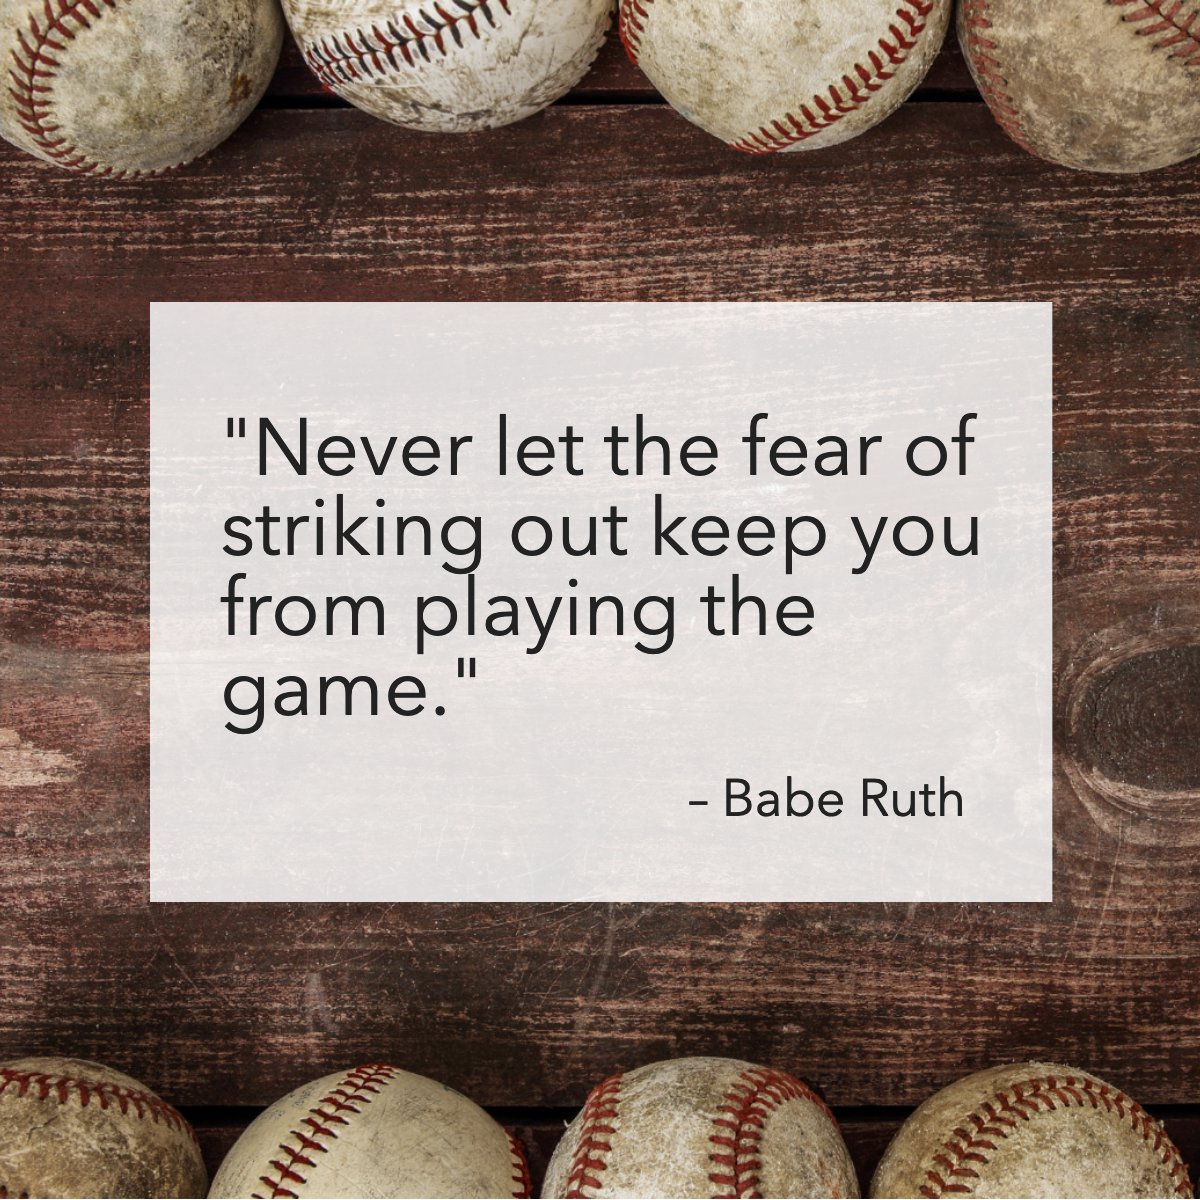 I guess we just have to keep playing! 🙏

Share with us a motivational quote! 💭

#inspiring #motivation #sports #baseball #baberuth #quote
 #realtynewengland #mannymenezesgroup #realtyne #wesellnewengland #welovenewengland #ilovenewengland #massrealestate